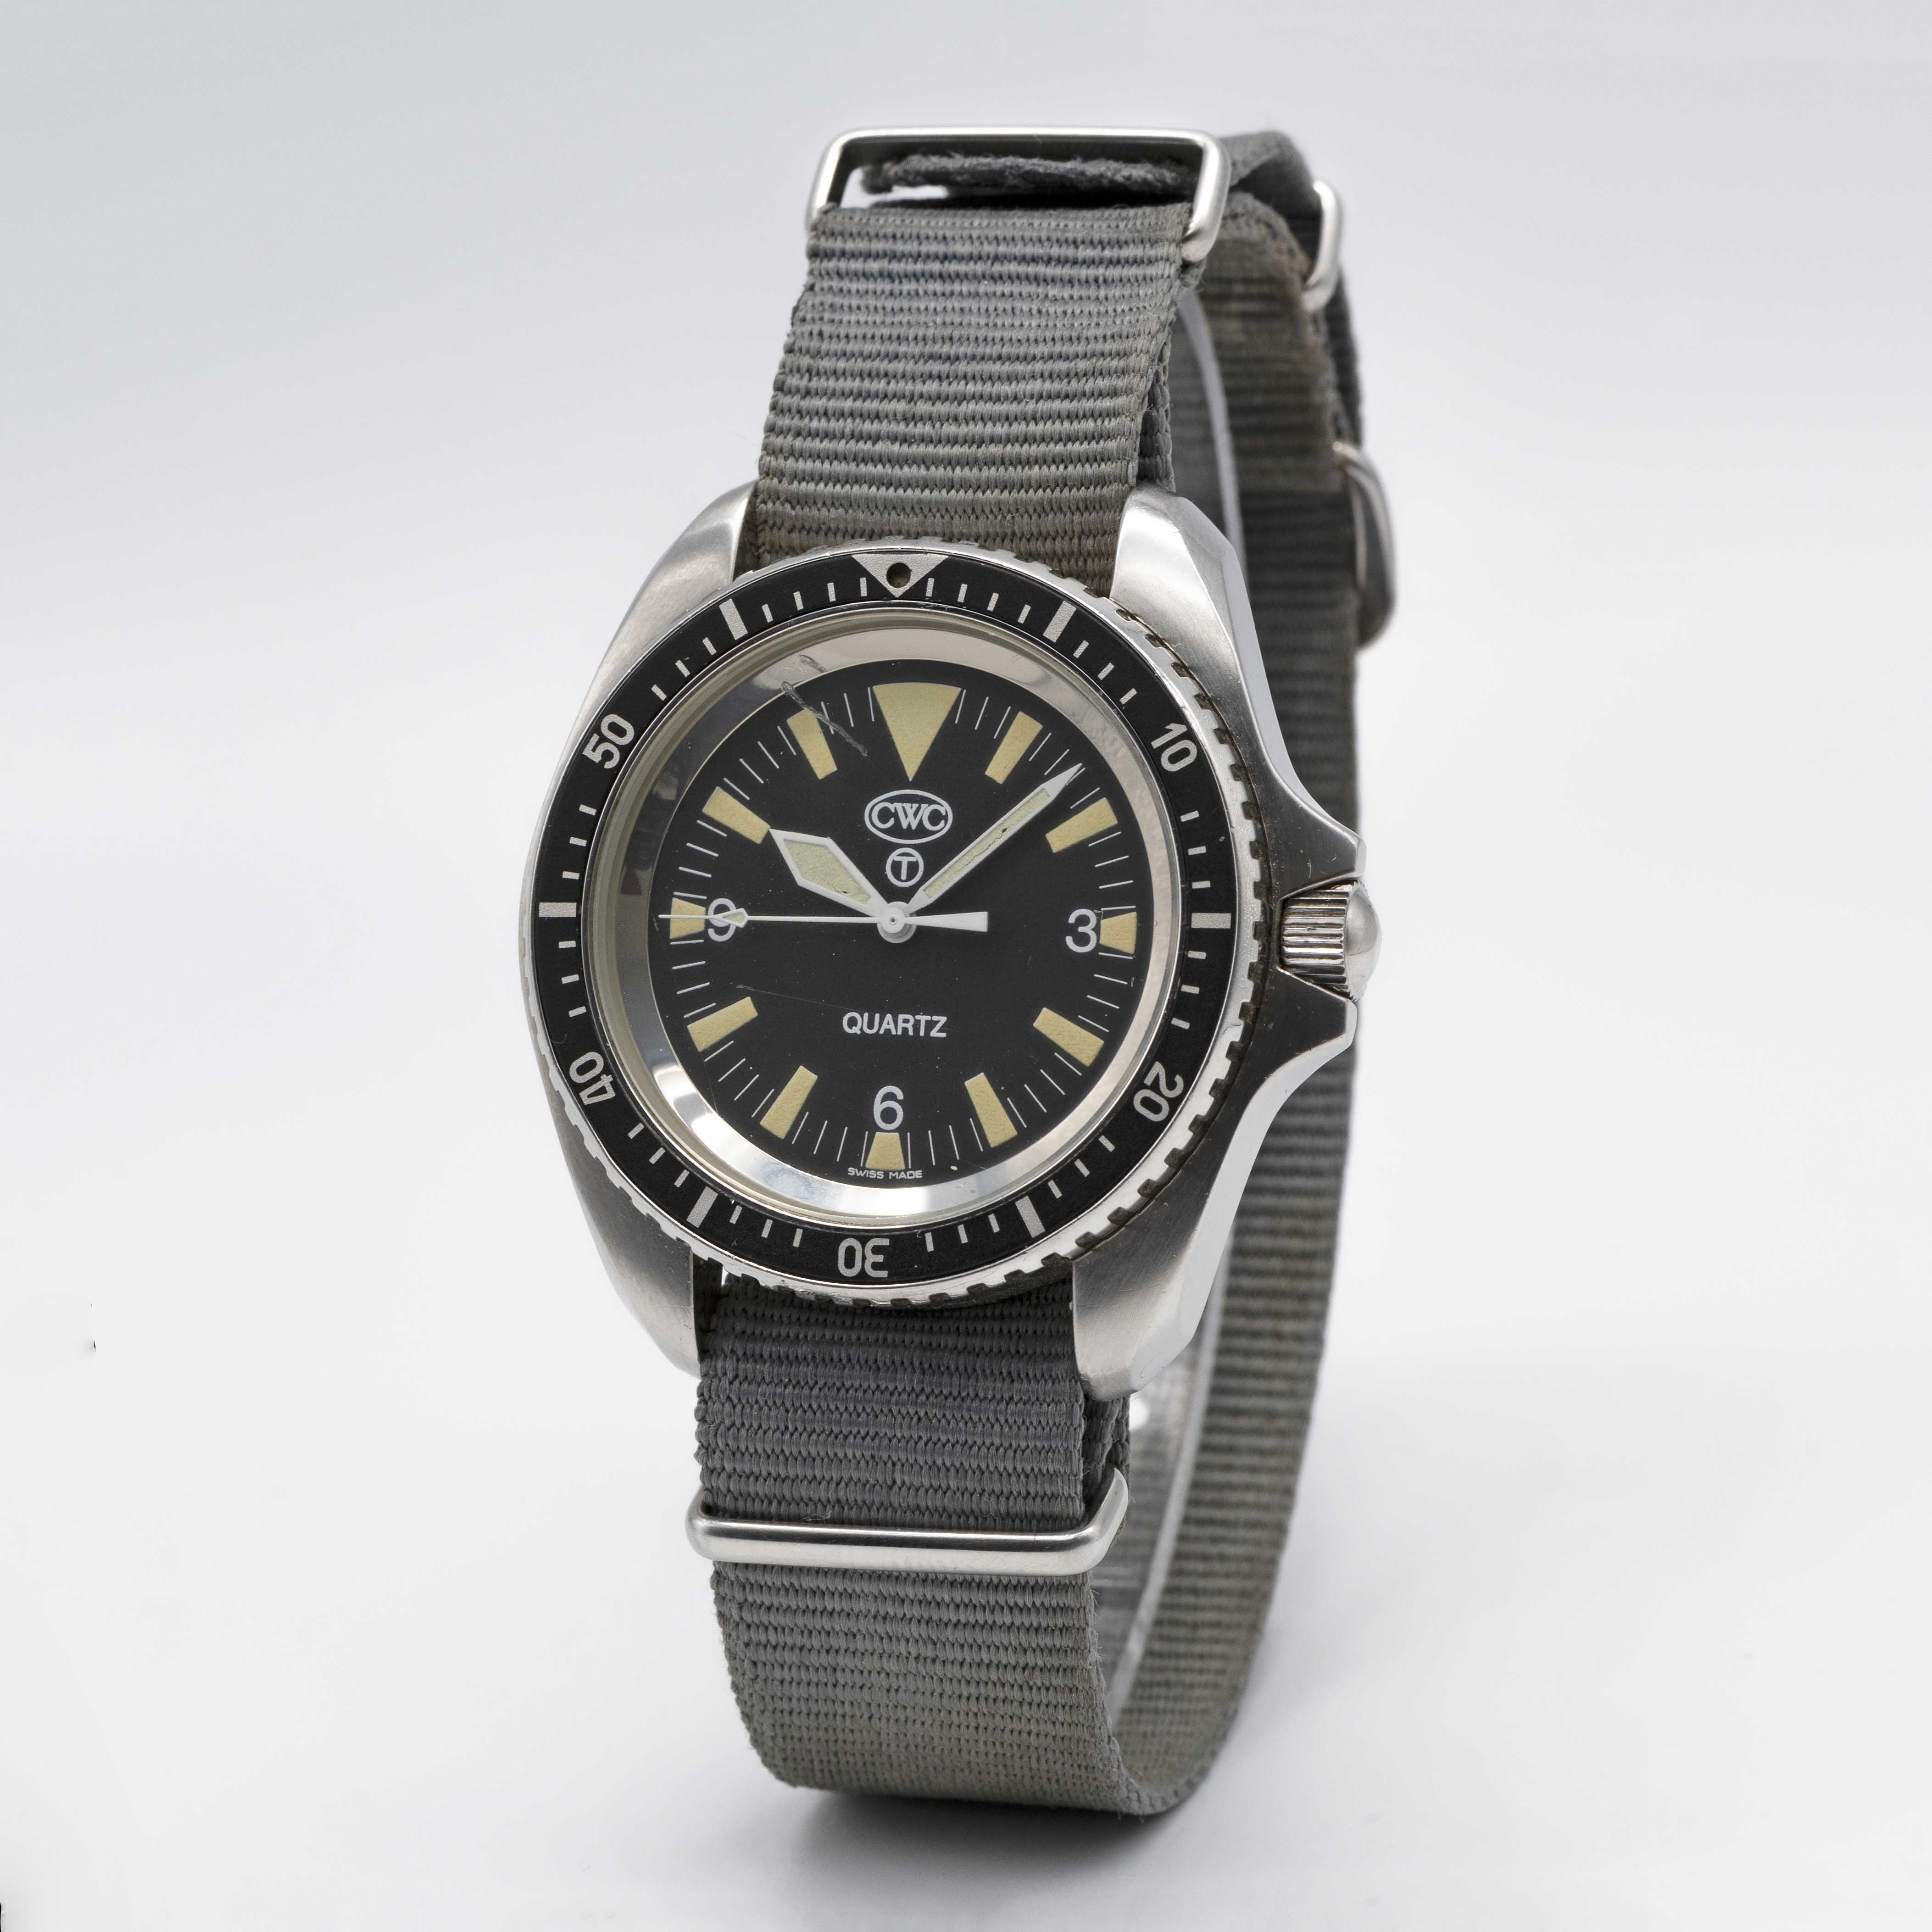 A GENTLEMAN'S STAINLESS STEEL BRITISH MILITARY ISSUED CWC QUARTZ ROYAL NAVY DIVERS WRIST WATCH DATED - Image 3 of 8